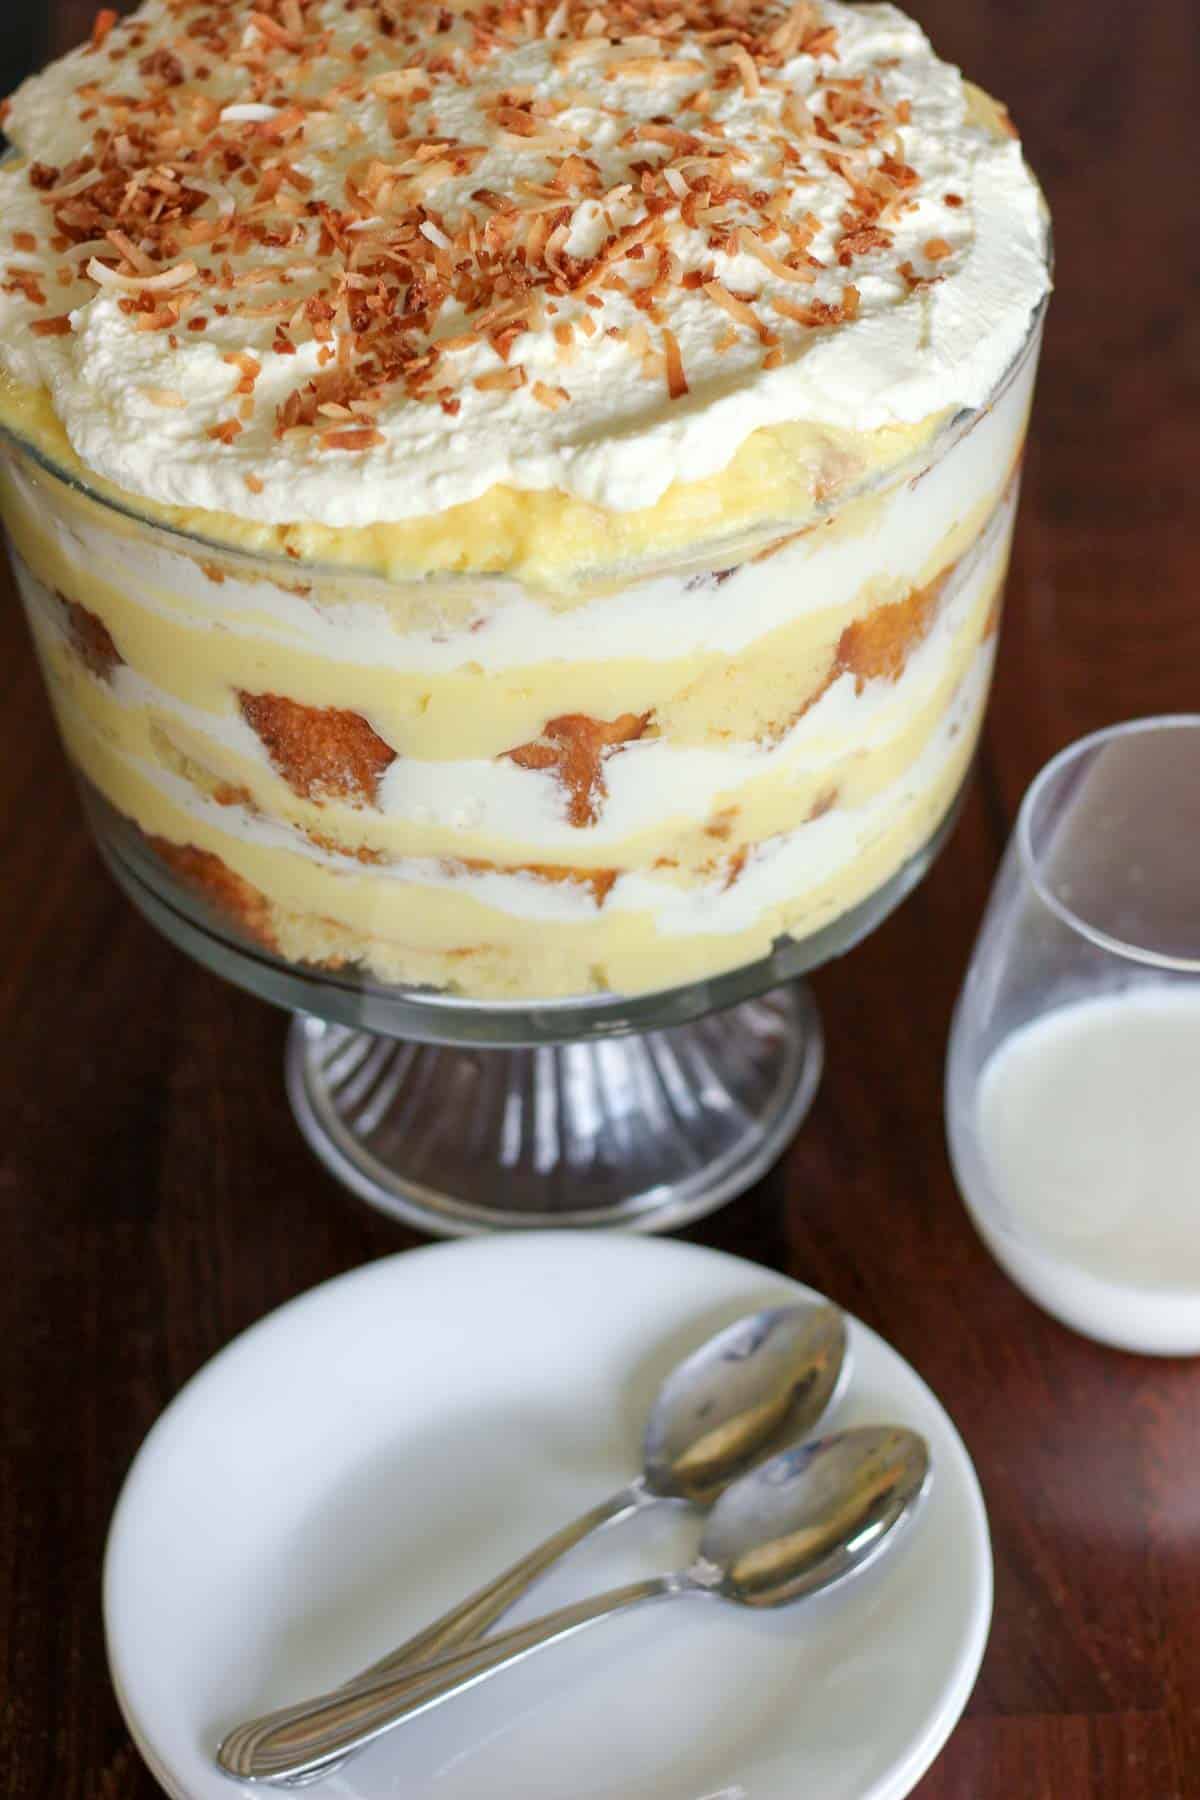 Dish of coconut cream trifle with plates, spoons and a glass of milk.